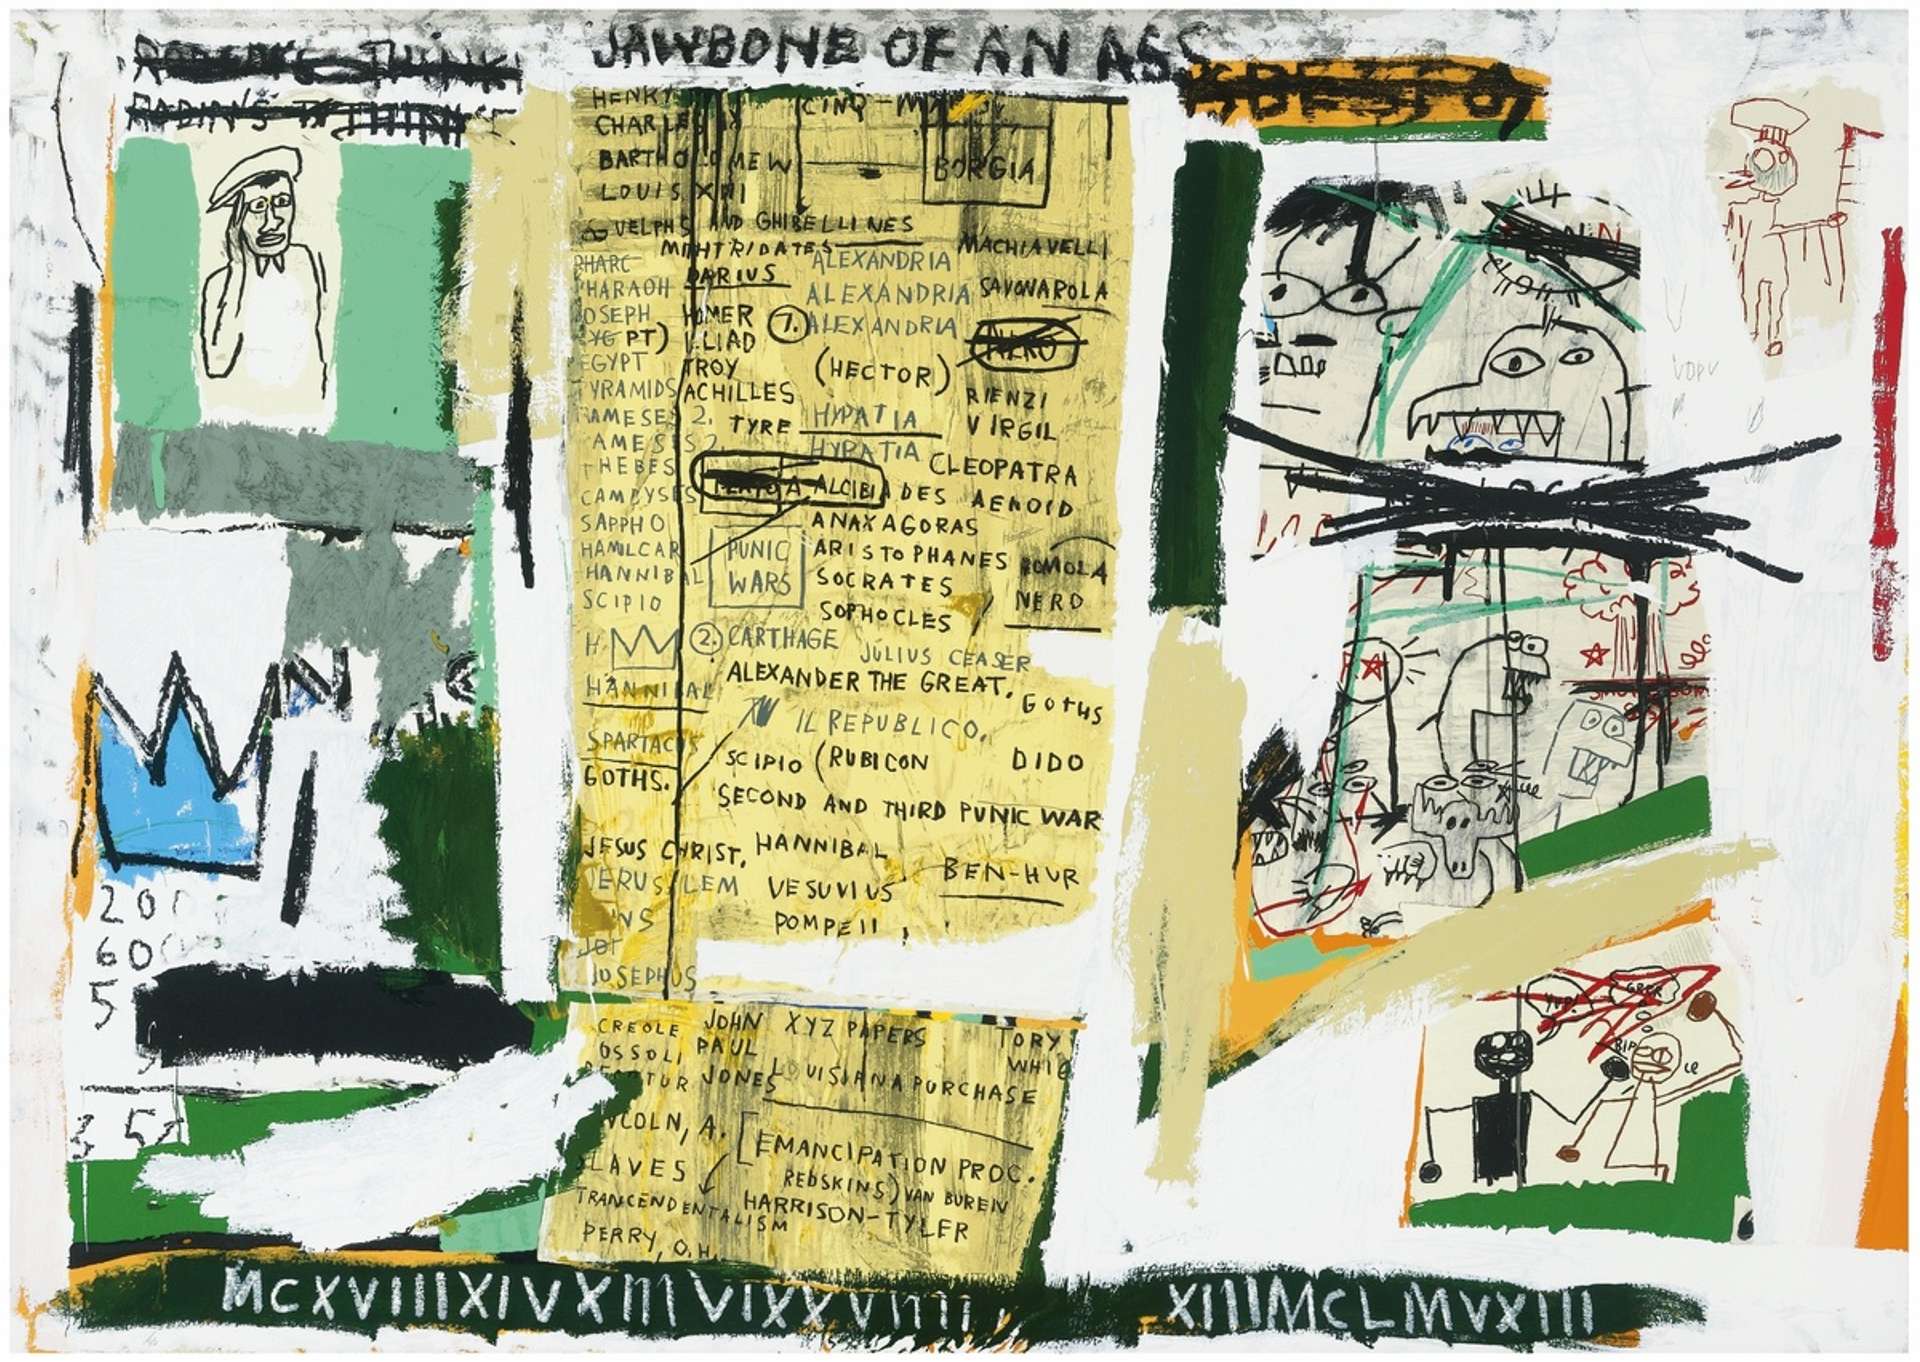 Dense green and yellow scribbles and writing